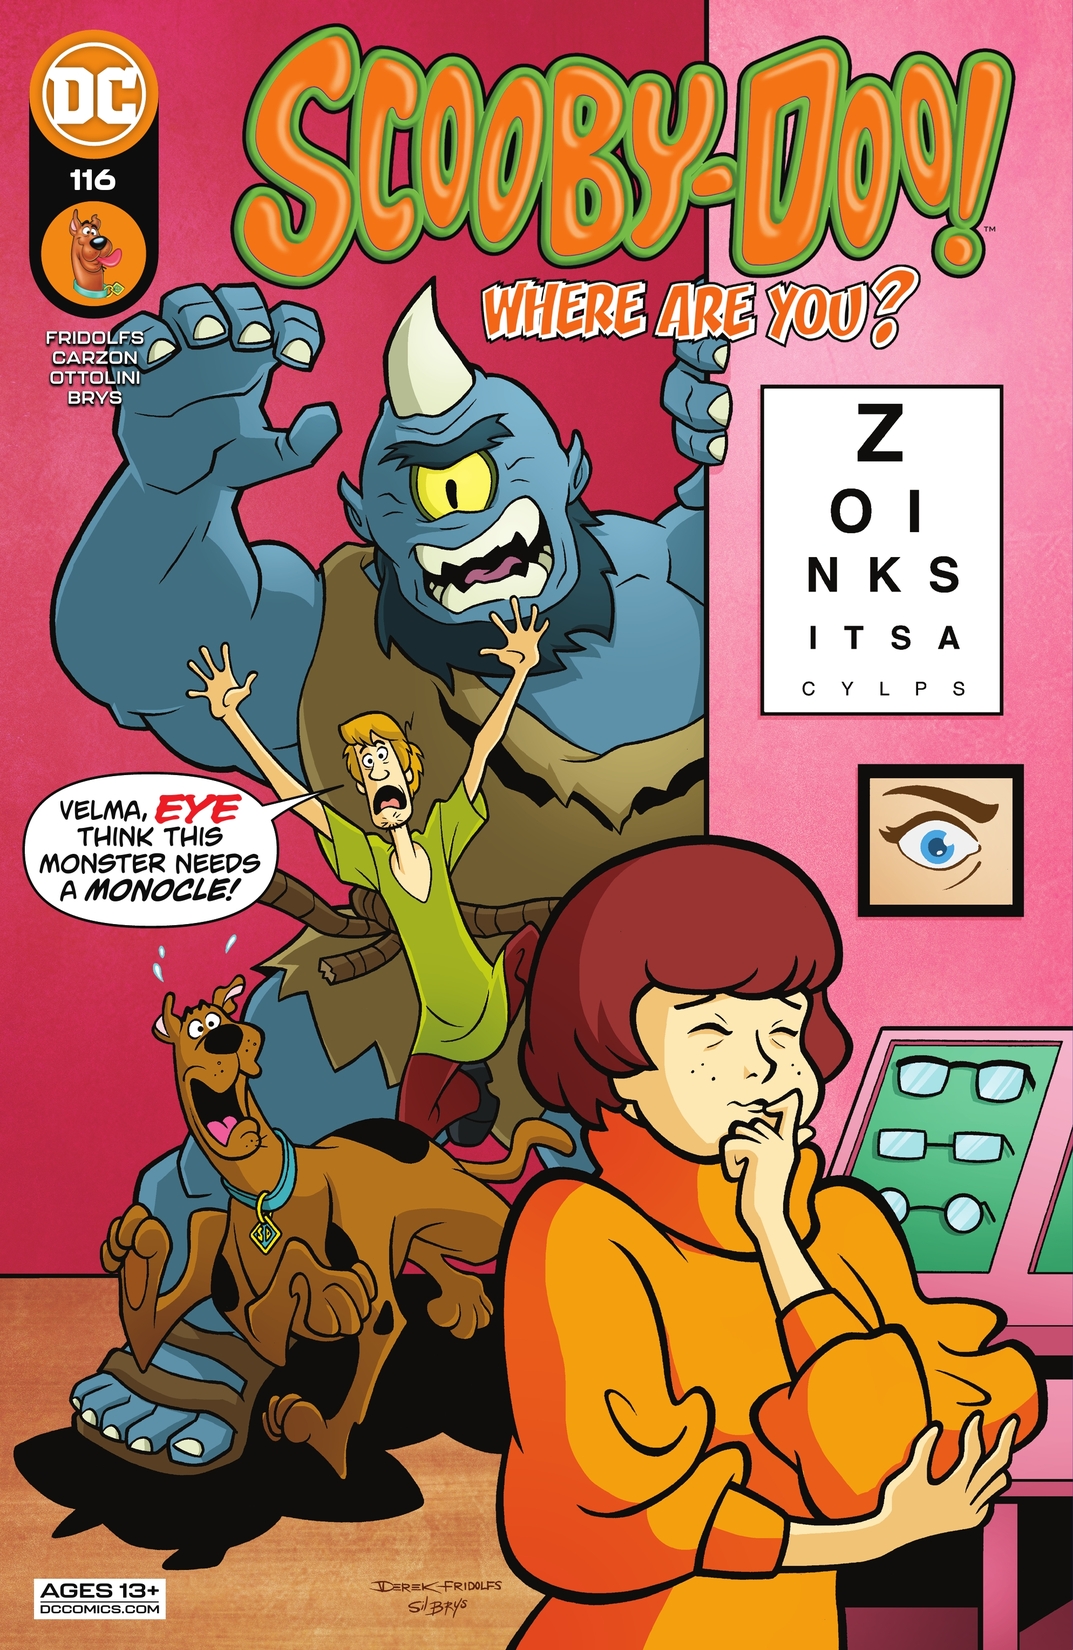 Scooby-Doo, Where Are You? #116 preview images